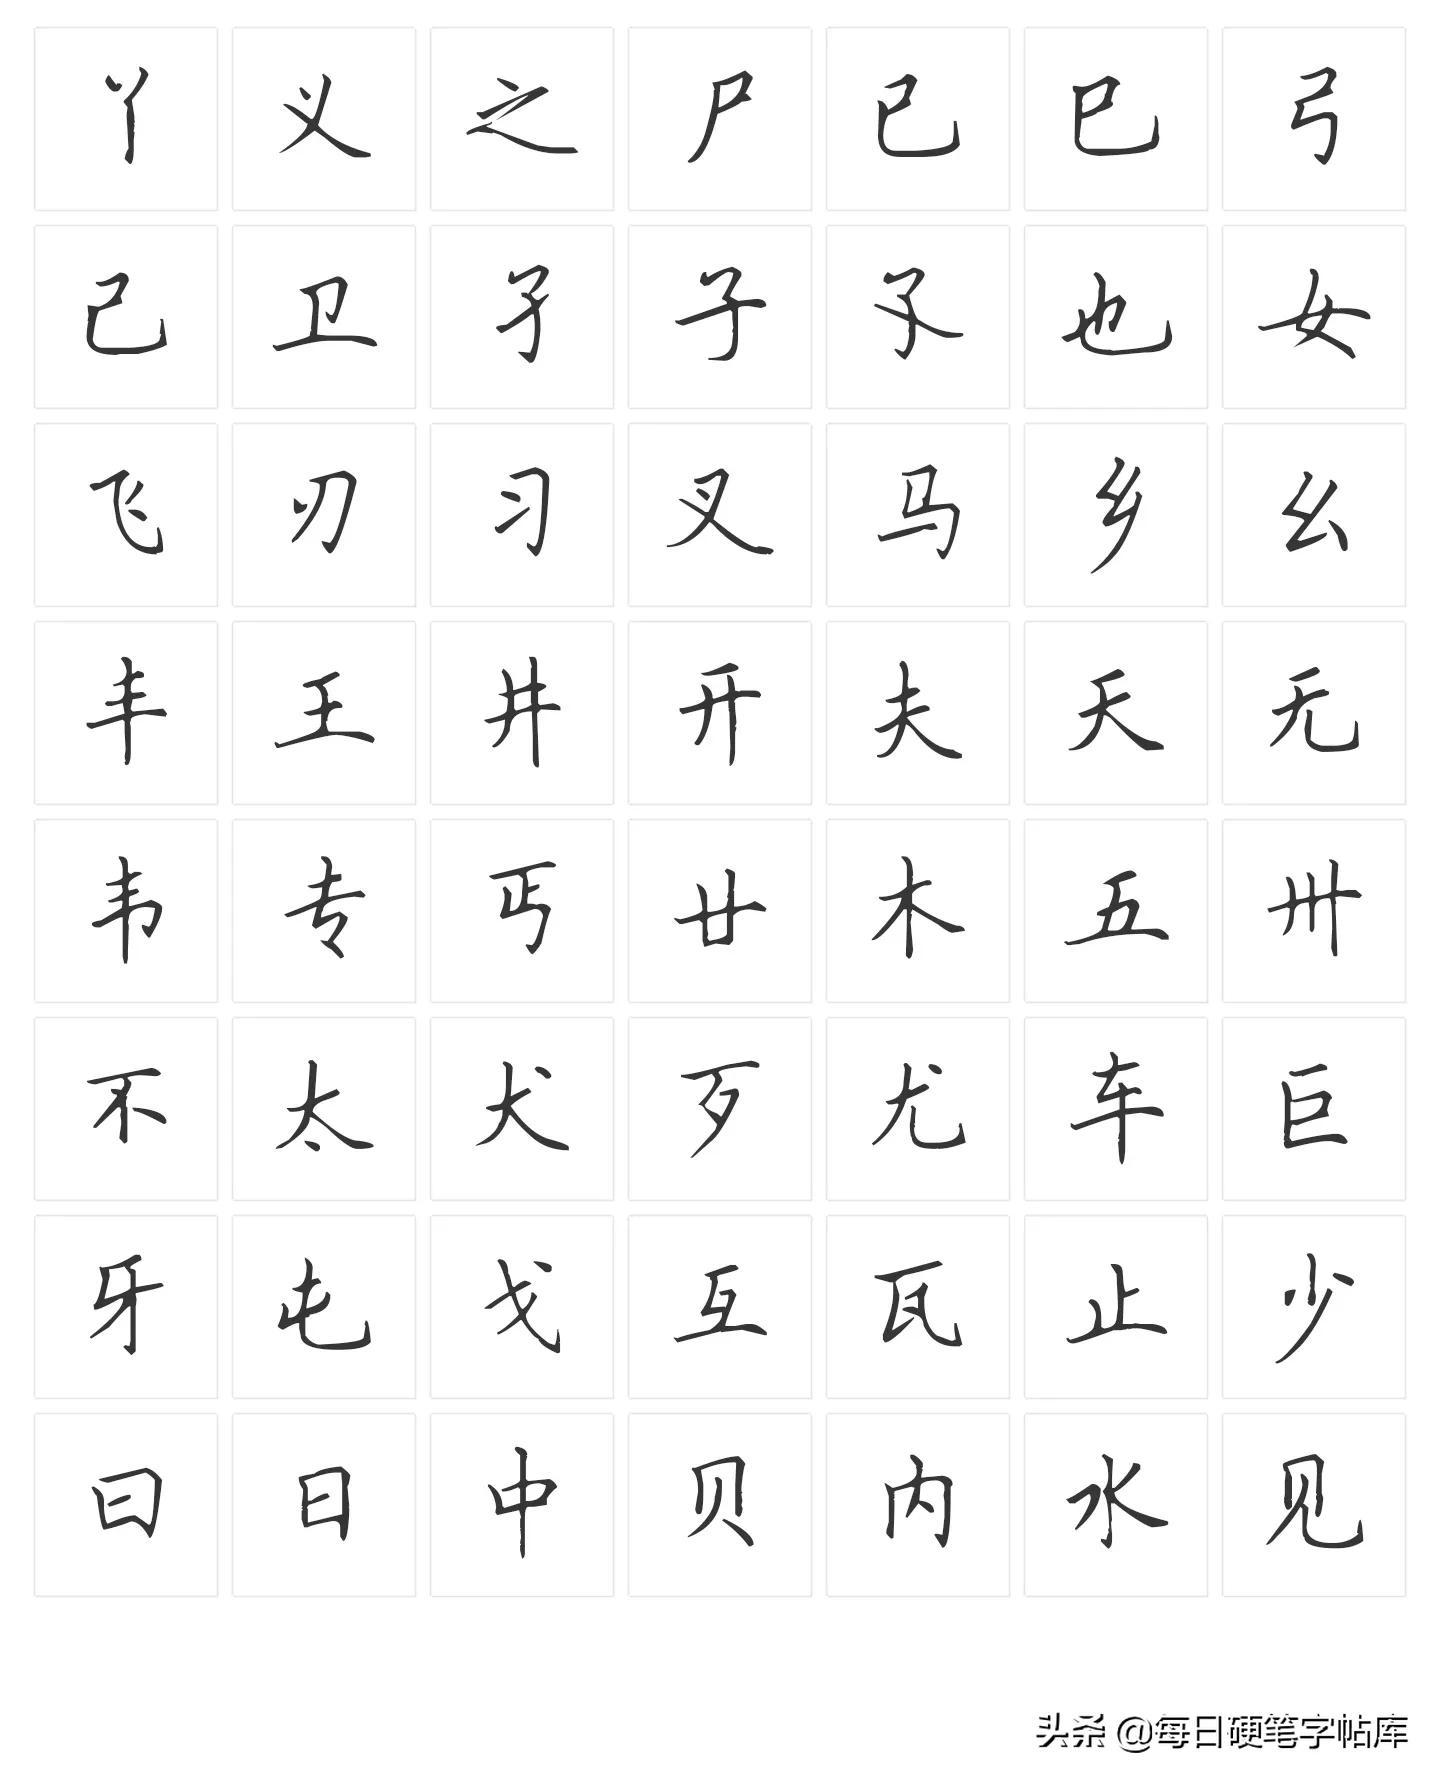 Commonly used 280 single-body characters, Tian Yingzhang hard pen running script regular script, recommended collection